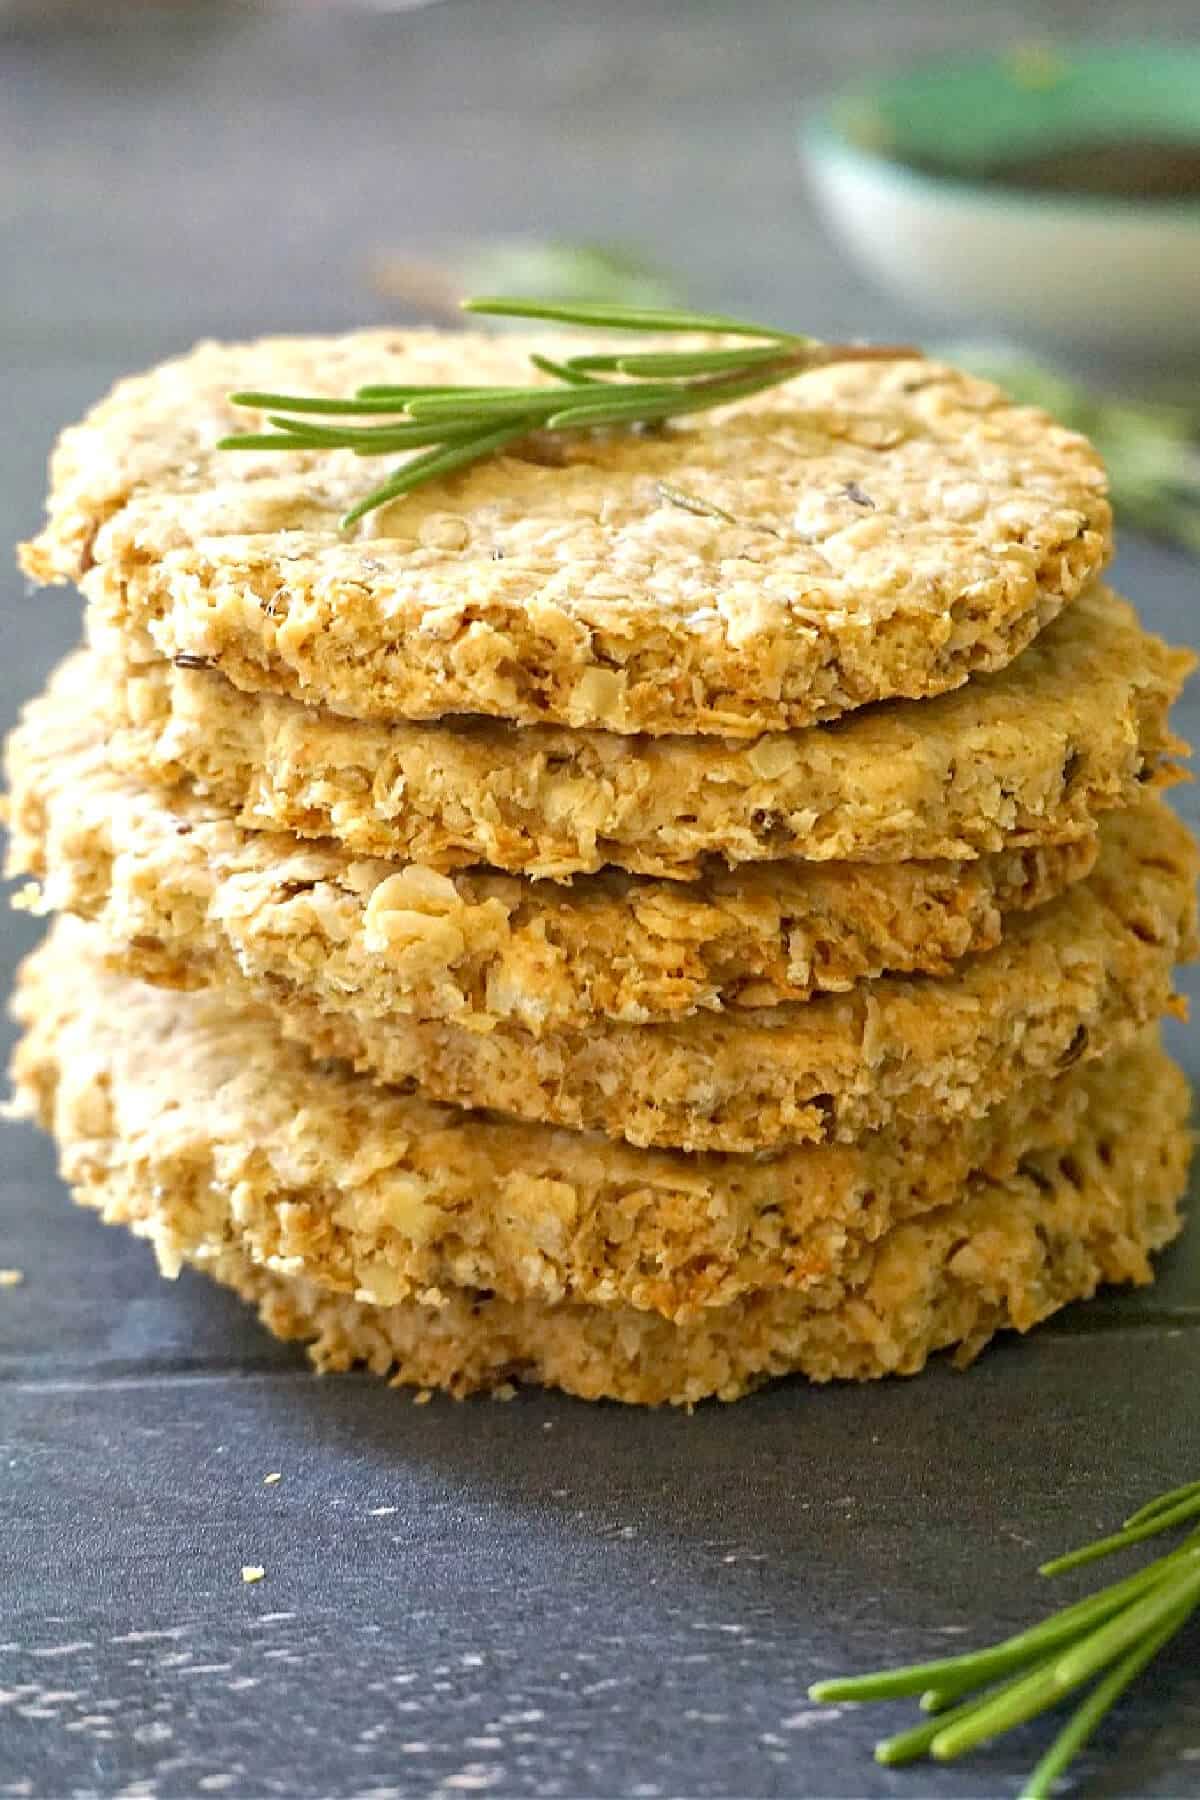 A stack of 6 oat biscuits with a rosemary sprig on top.